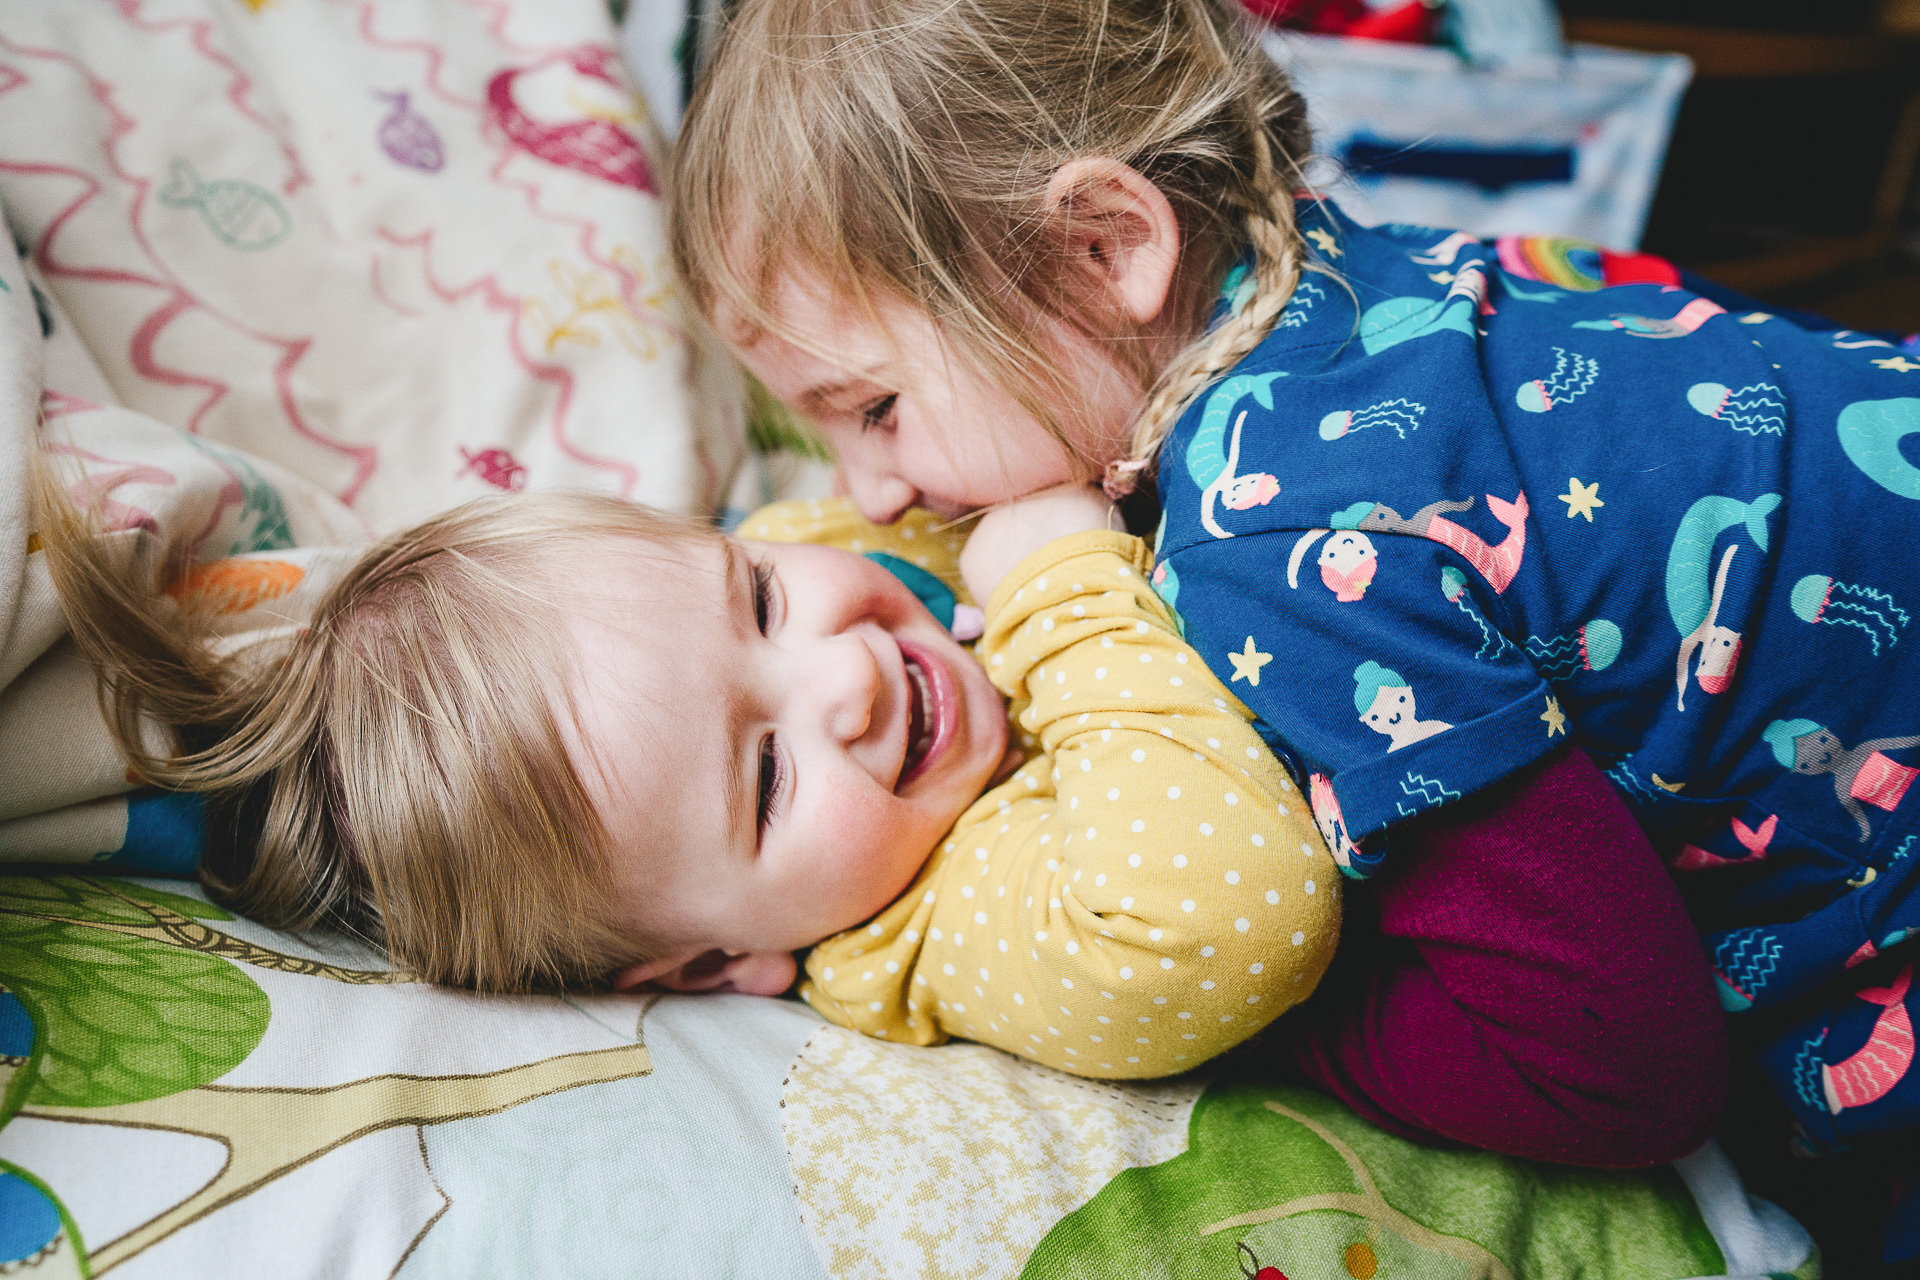 Two young sisters playing together and laughing